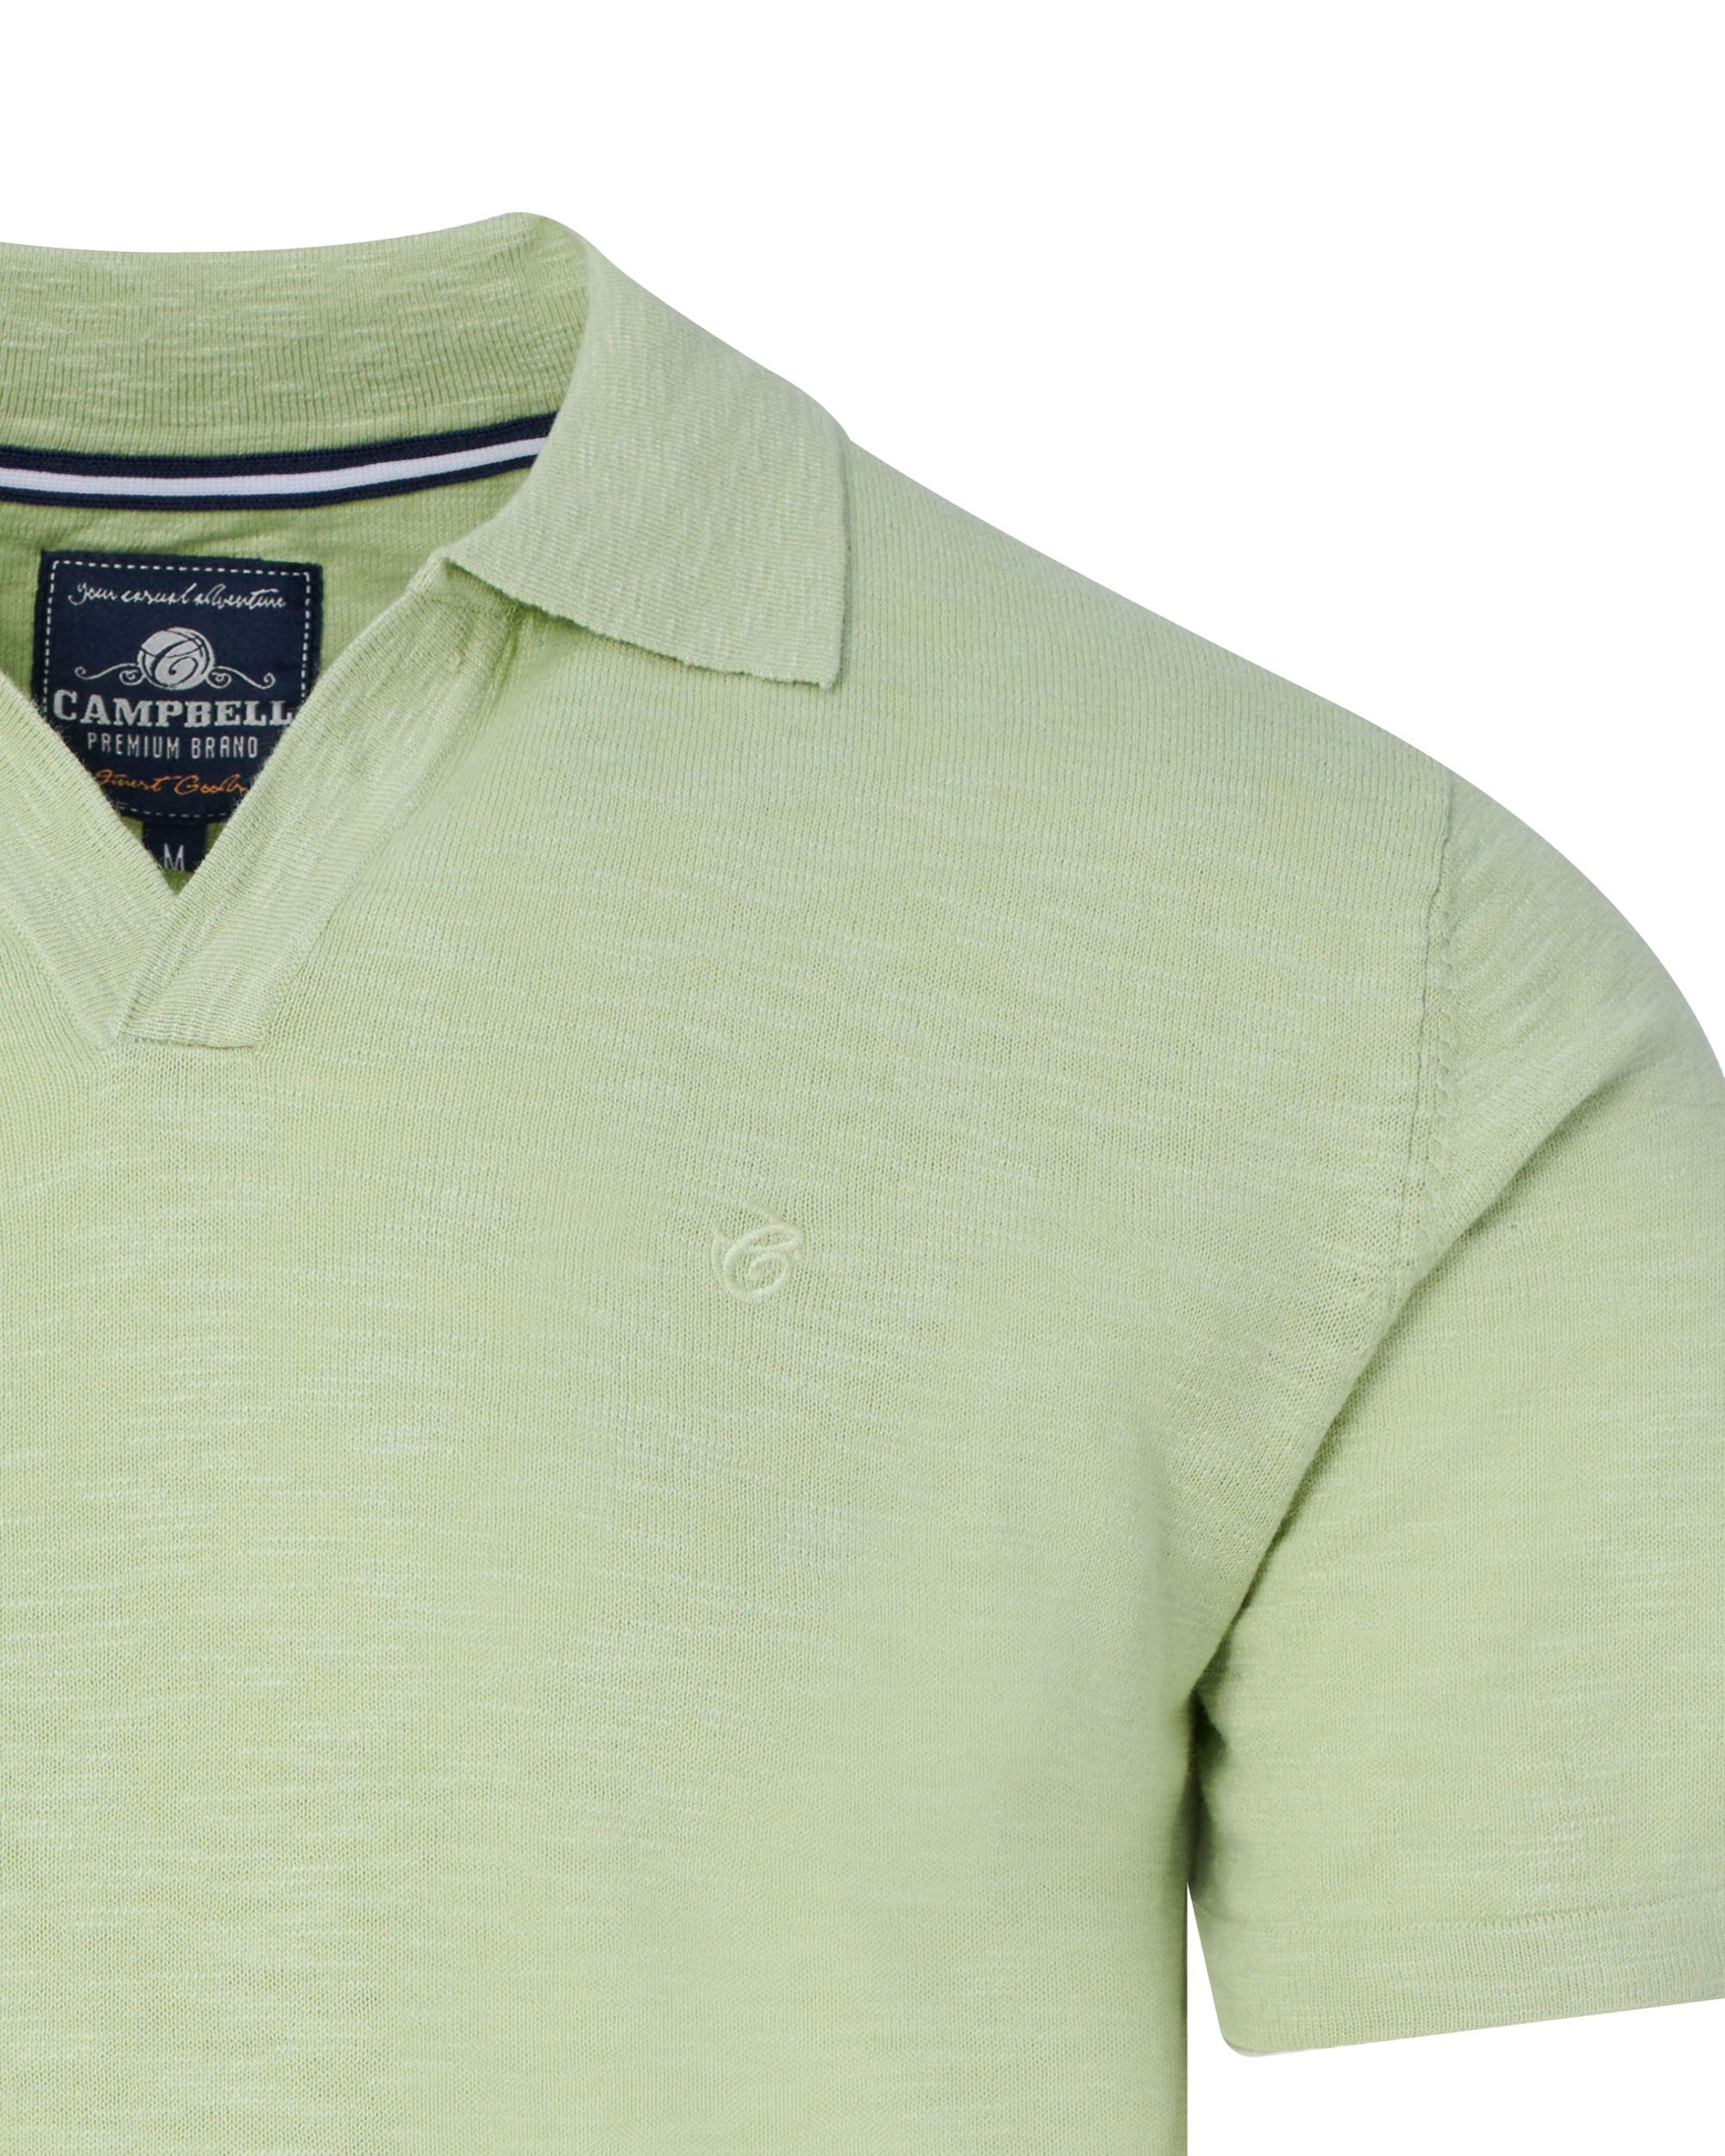 Campbell Classic Nelson Polo KM Celadon Green 089149-005-L